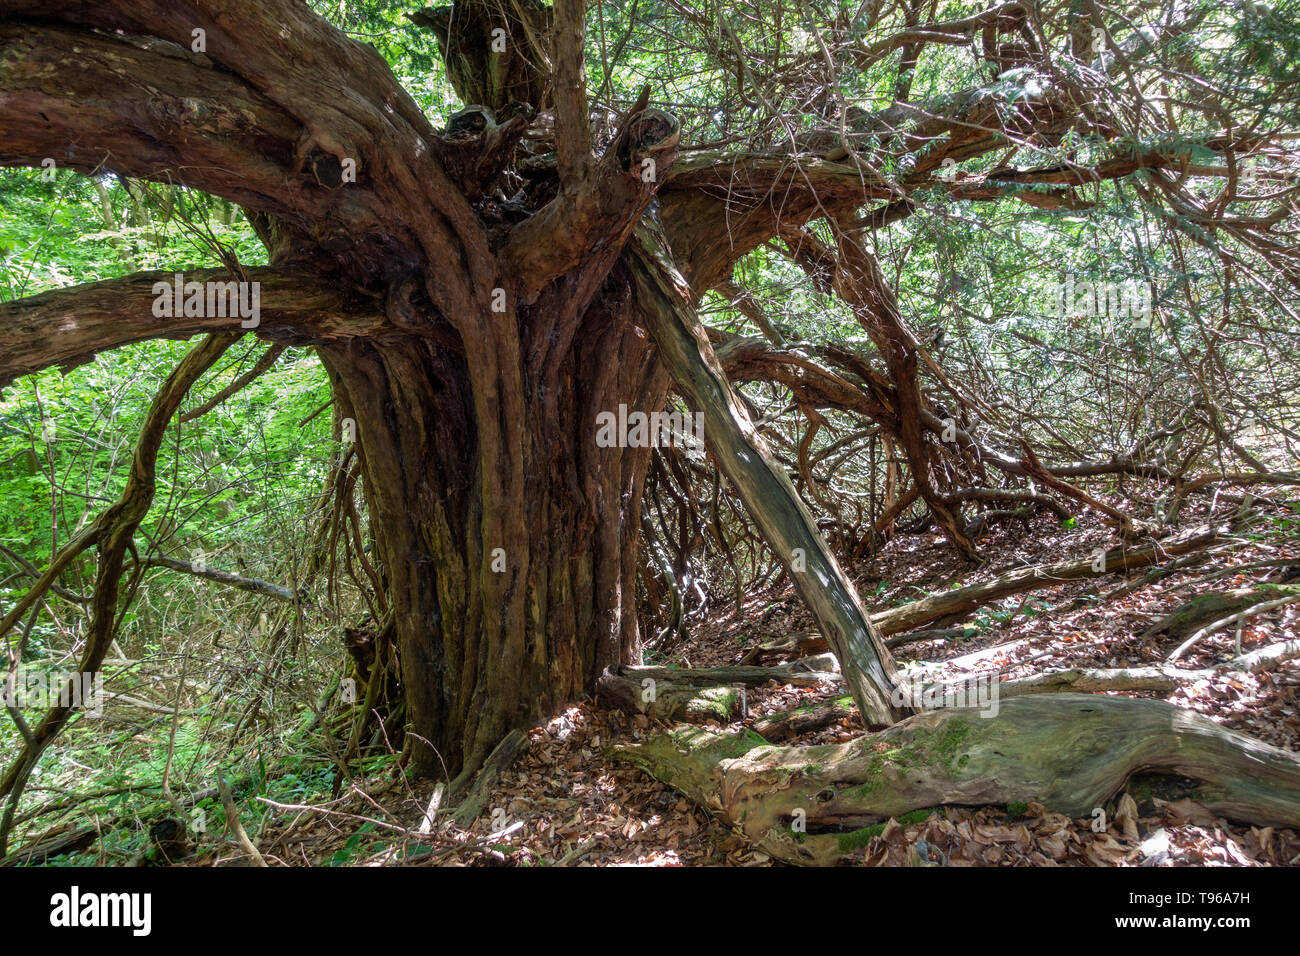 An old yew tree (Taxus baccata) in Druids Grove, Norbury Park, Mickleham, Surrey, UK. Stock Photo